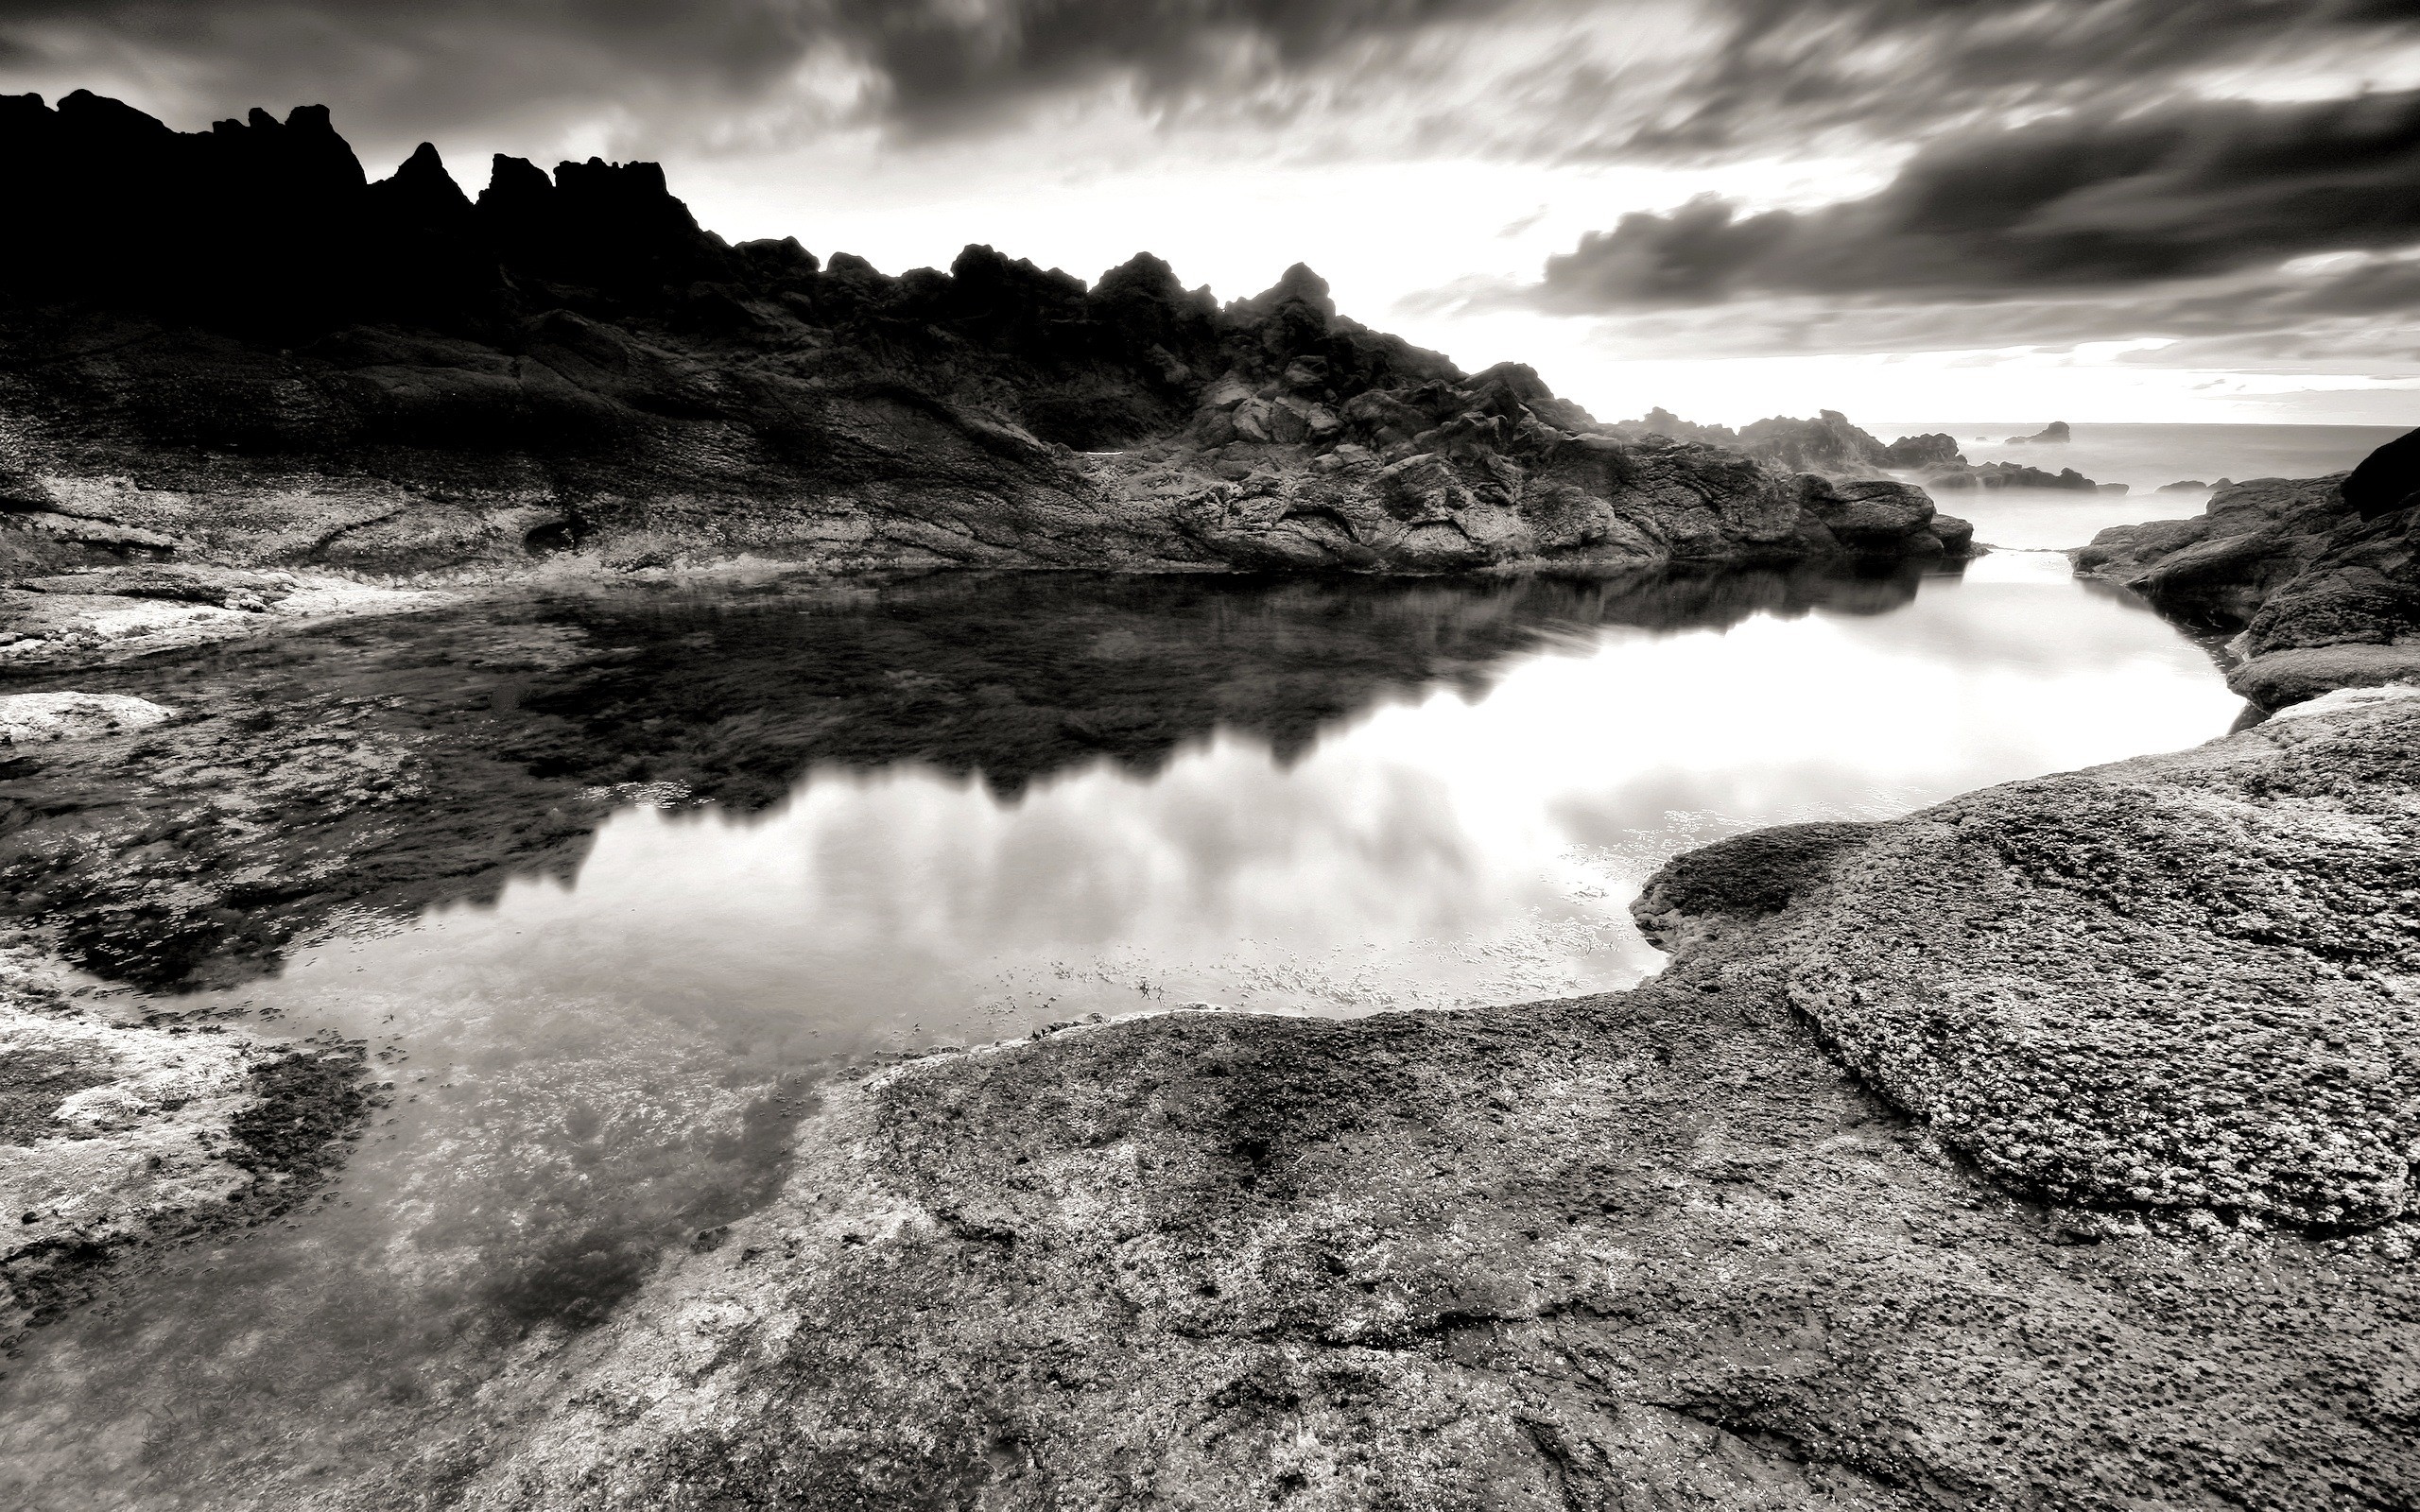 Wallpaper, landscape, sea, rock, nature, shore, reflection, long exposure, clouds, coast, river, cloud, mountain, ocean, material, Rapid, loch, atmospheric phenomenon, black and white, monochrome photography, body of water, wind wave 2560x1600